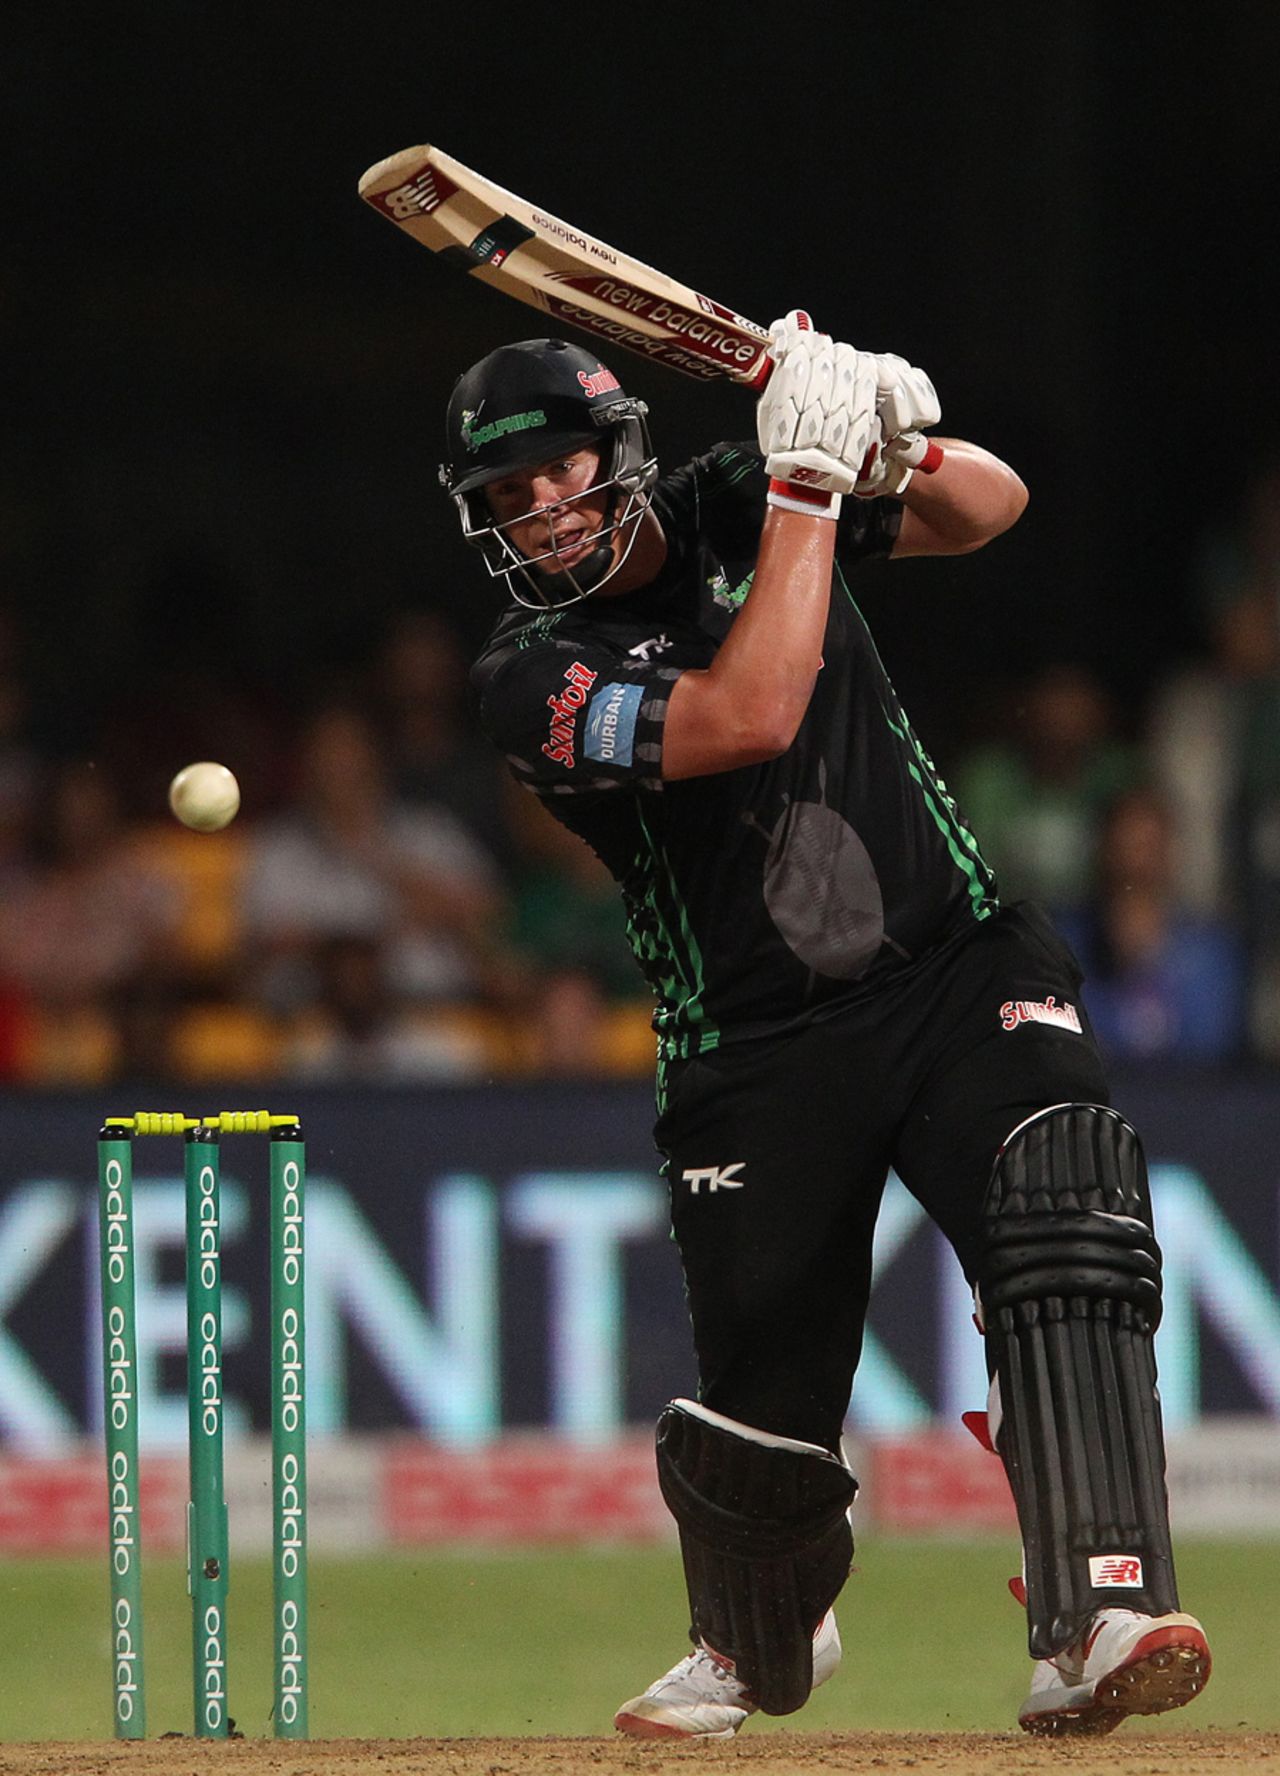 Robbie Frylinck struck a belligerent 63 to get Dolphins close, Dolphins v Lahore Lions, Champions League T20, Bangalore, September 27, 2014